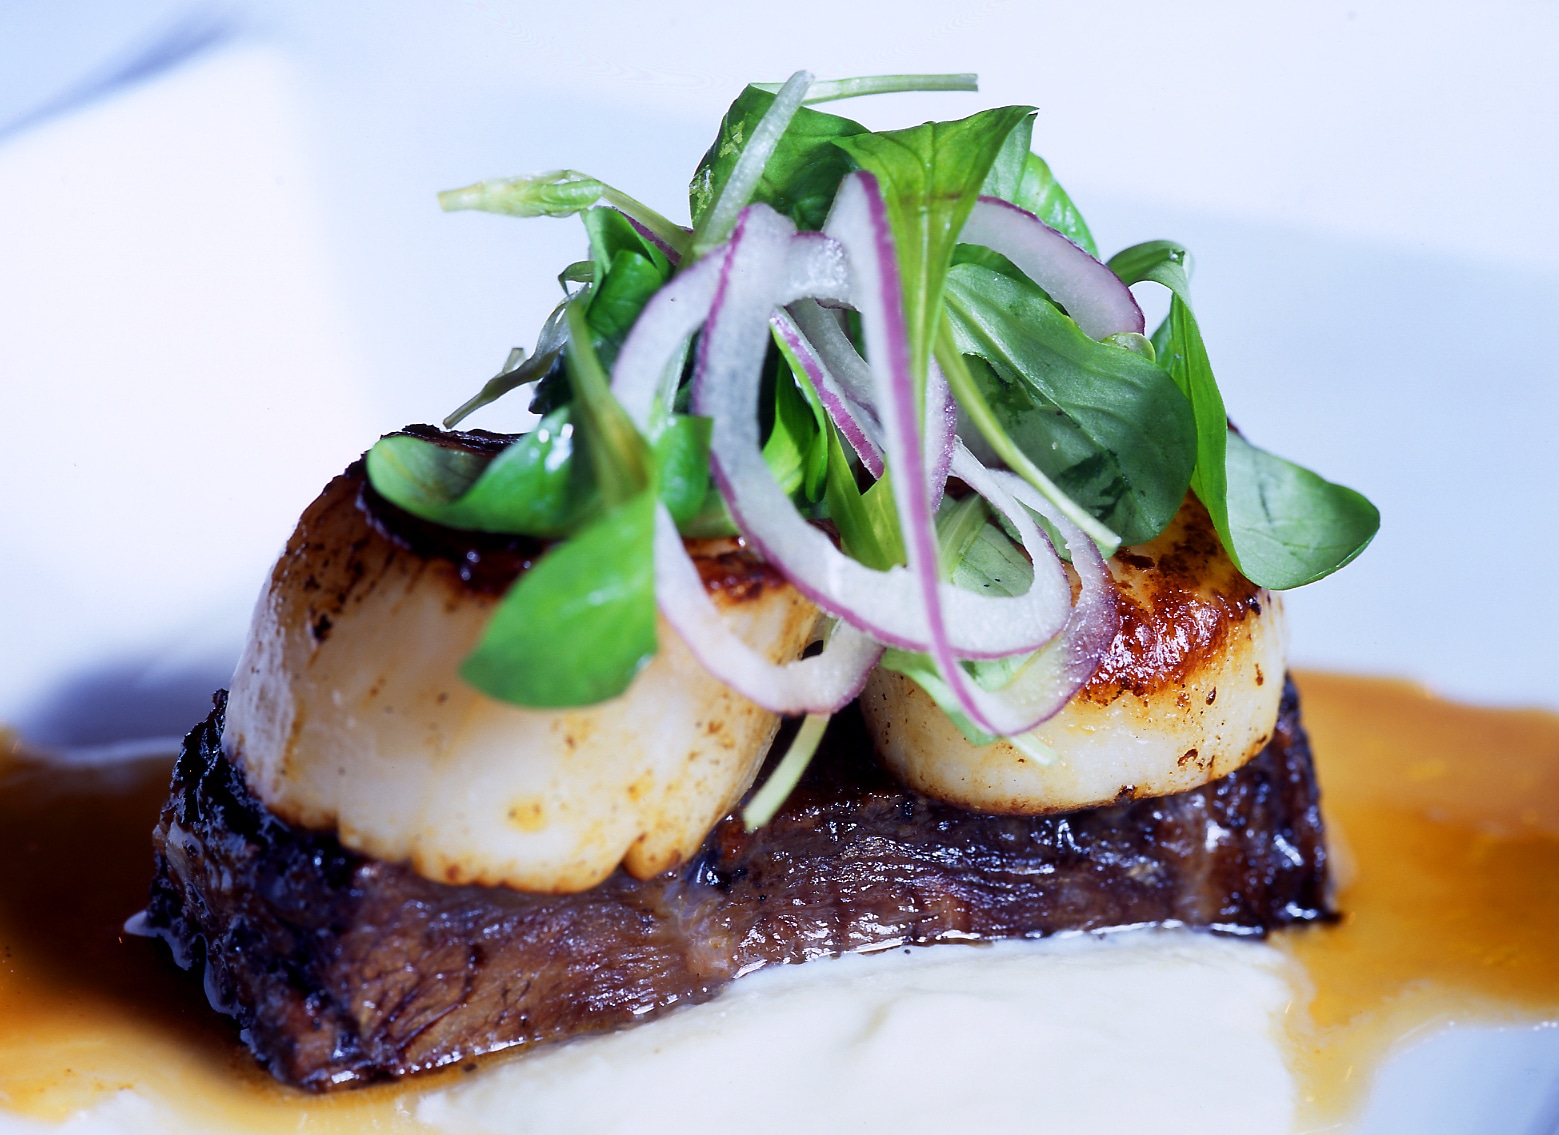 An order of scallops overtop of braised shortrib served at Todd English's Bluezoo at the Walt Disney World Dolphin